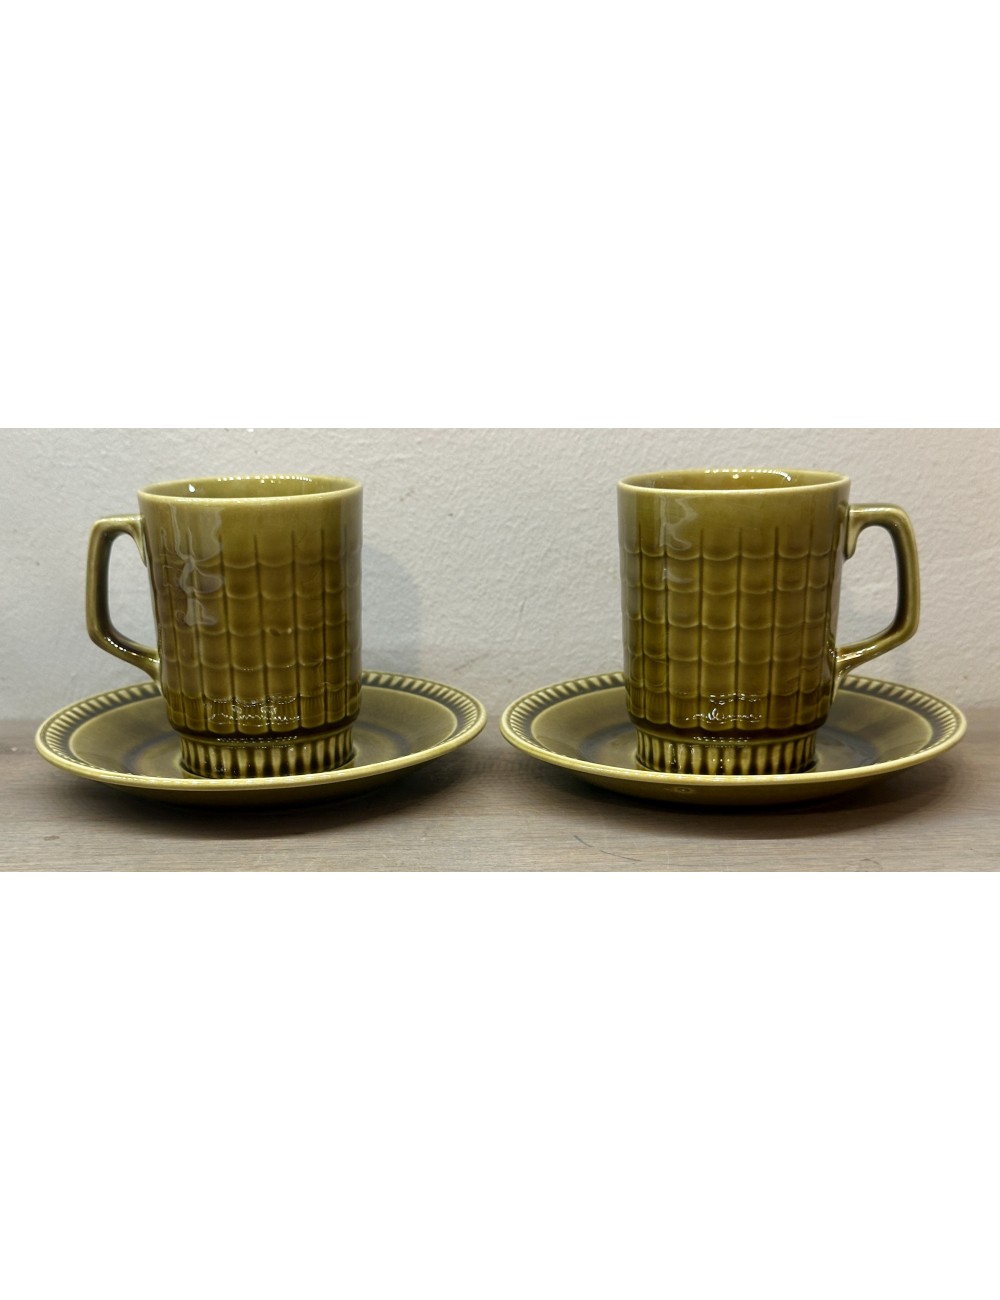 Cup and saucer - high model - Boch - shape ASCOT - décor FLORIDE executed in khaki green